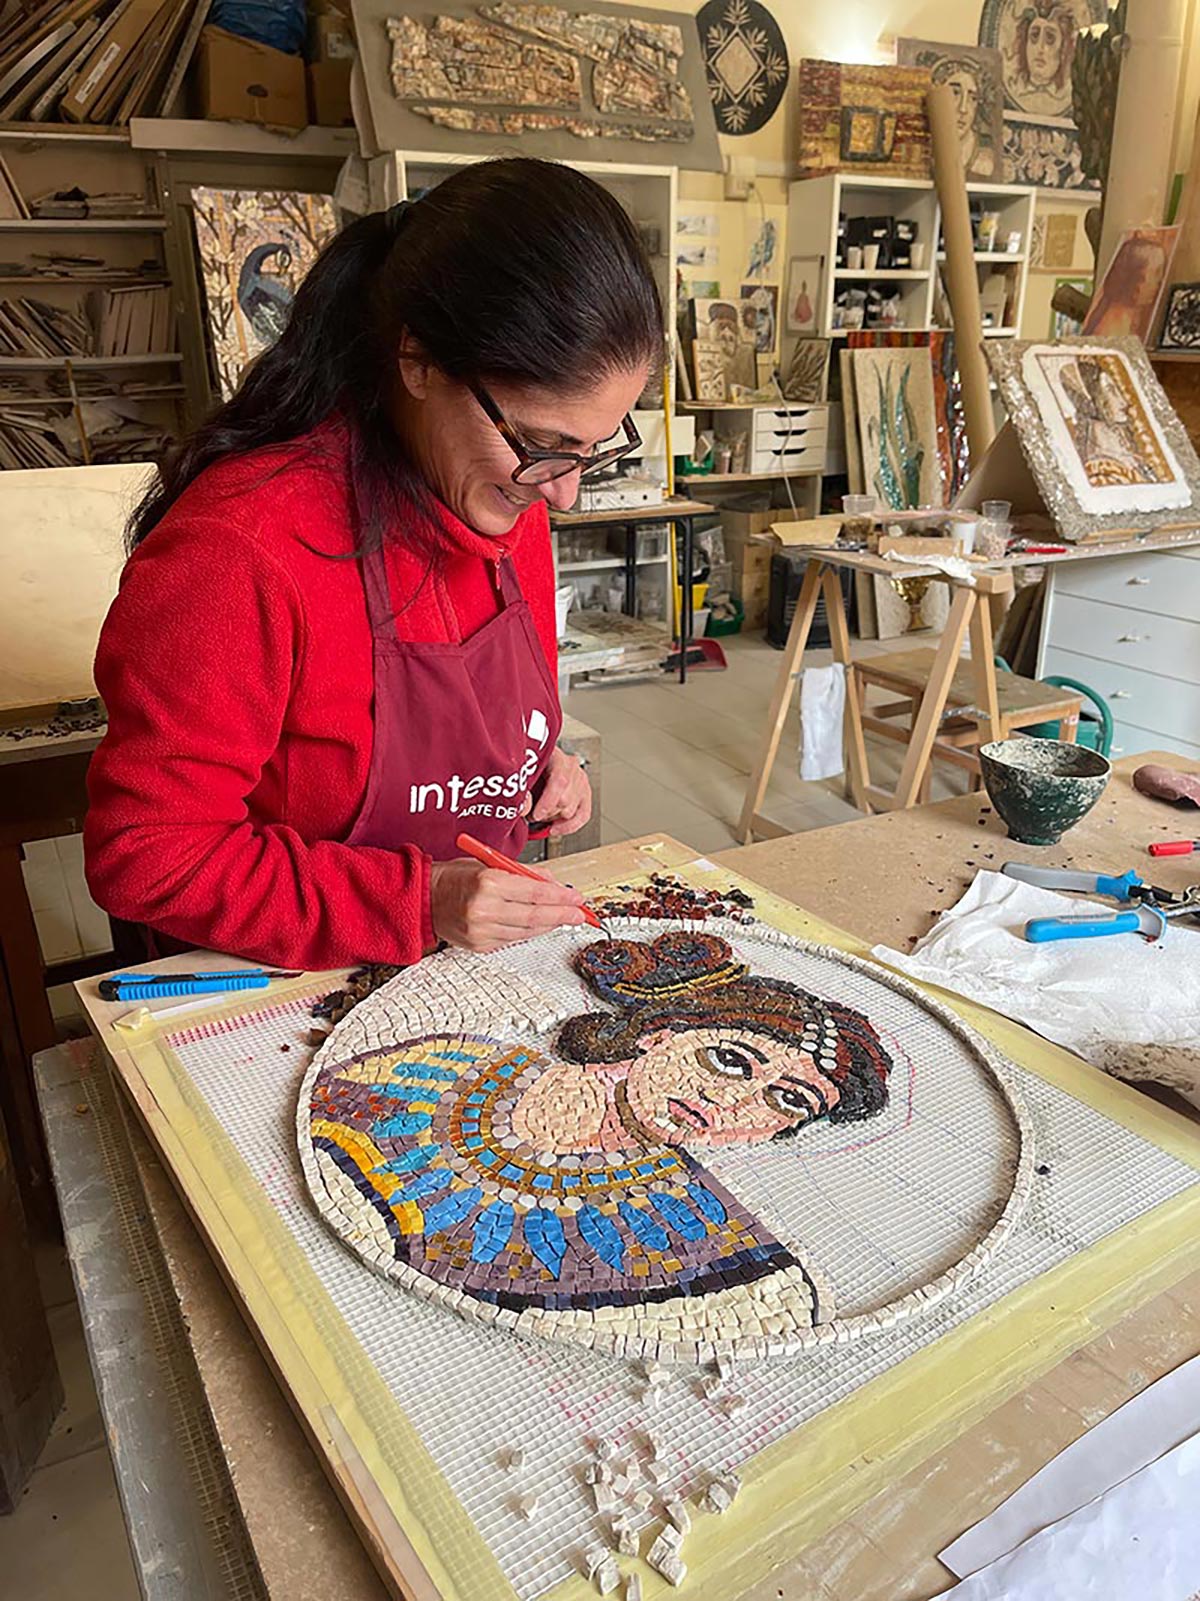 Professional Individual Mosaic Course in Italy (Umbria)